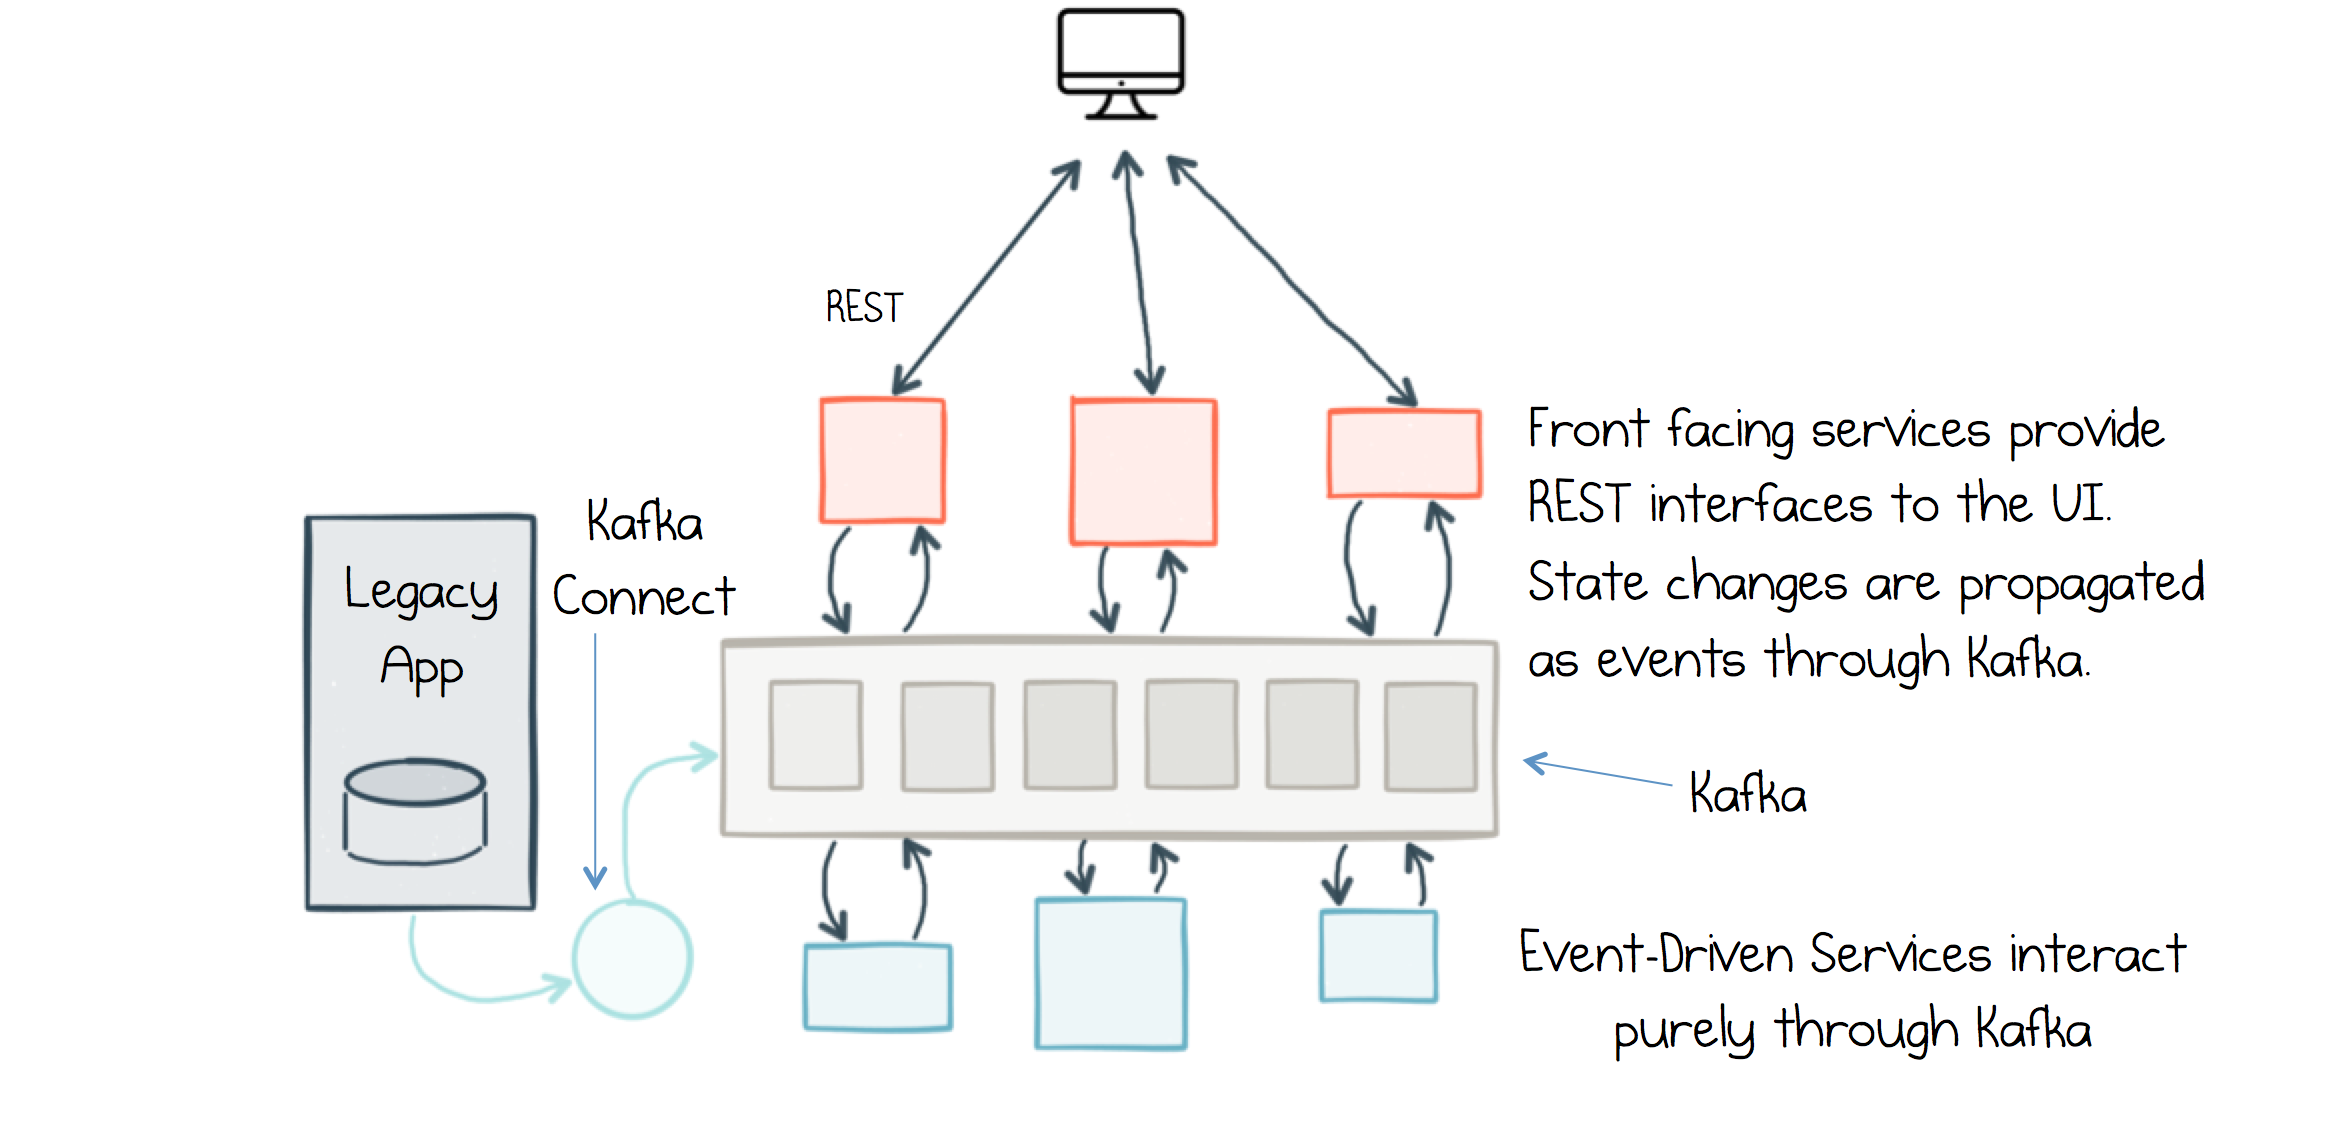 Using Apache Kafka as a Scalable, Event-Driven Backbone for Service Architectures